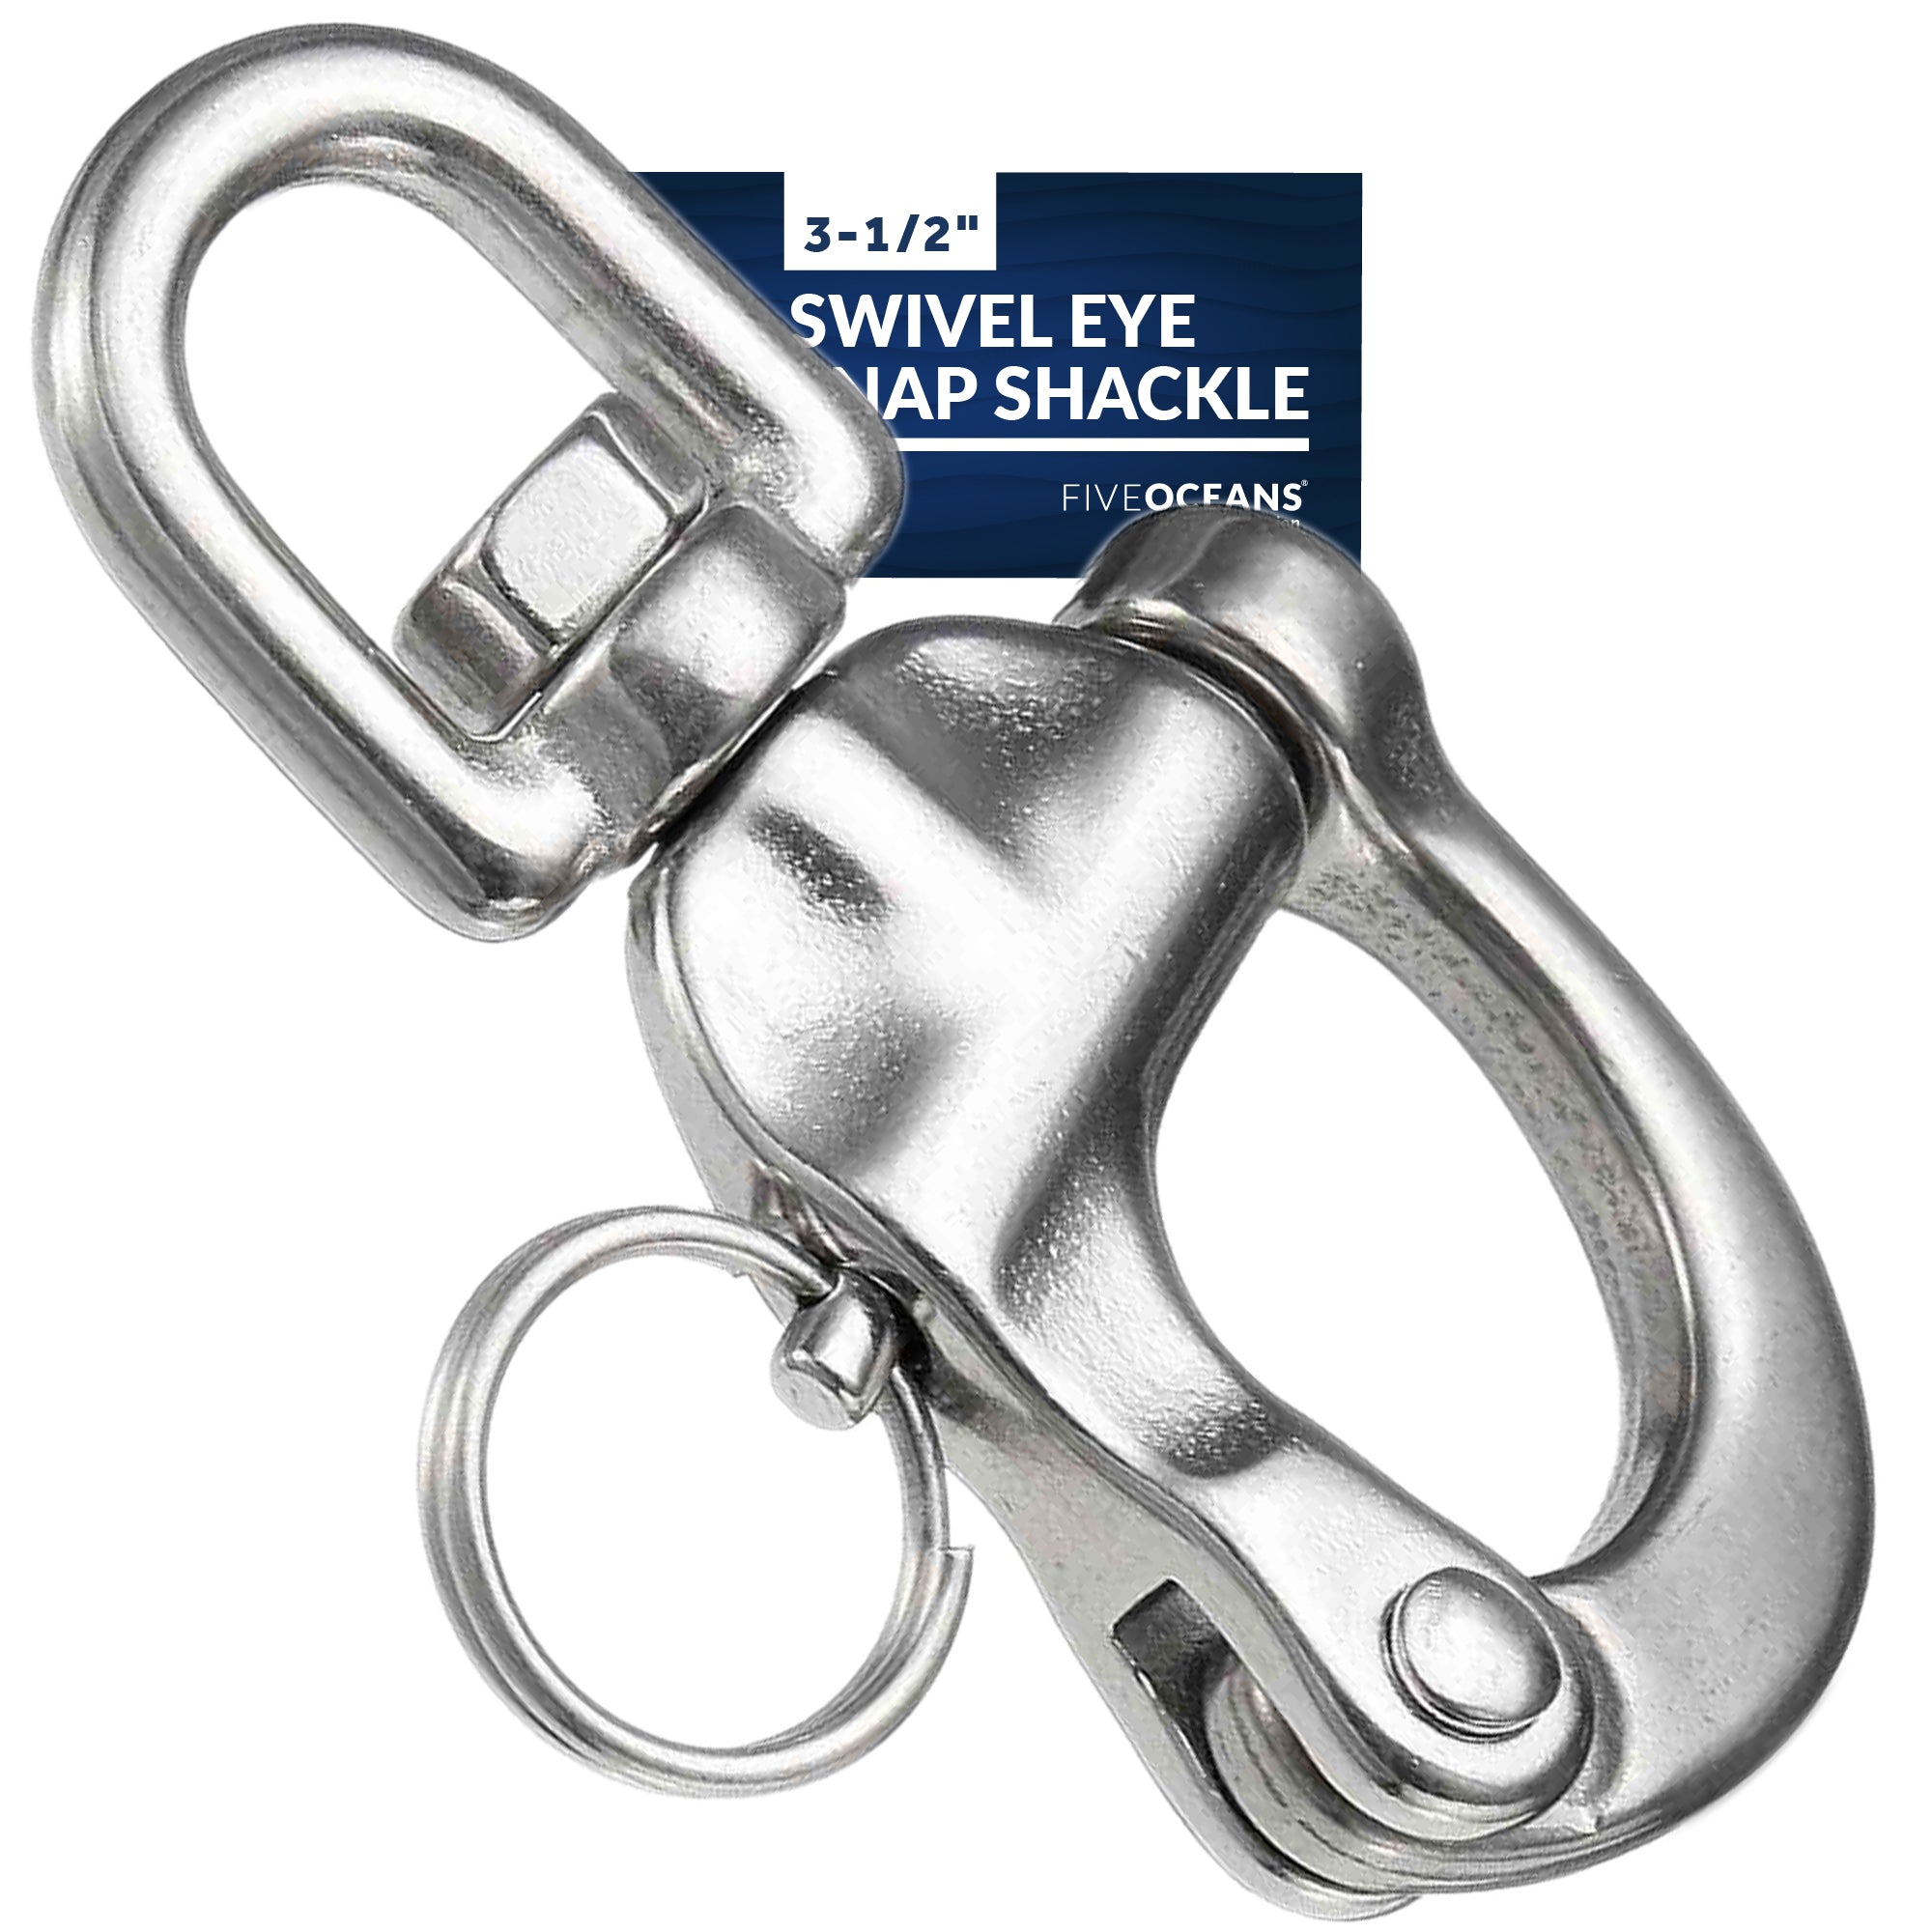 Swivel Eye Snap Shackle Quick Release Bail Rigging, 3 1/2" Stainless Steel - FO444